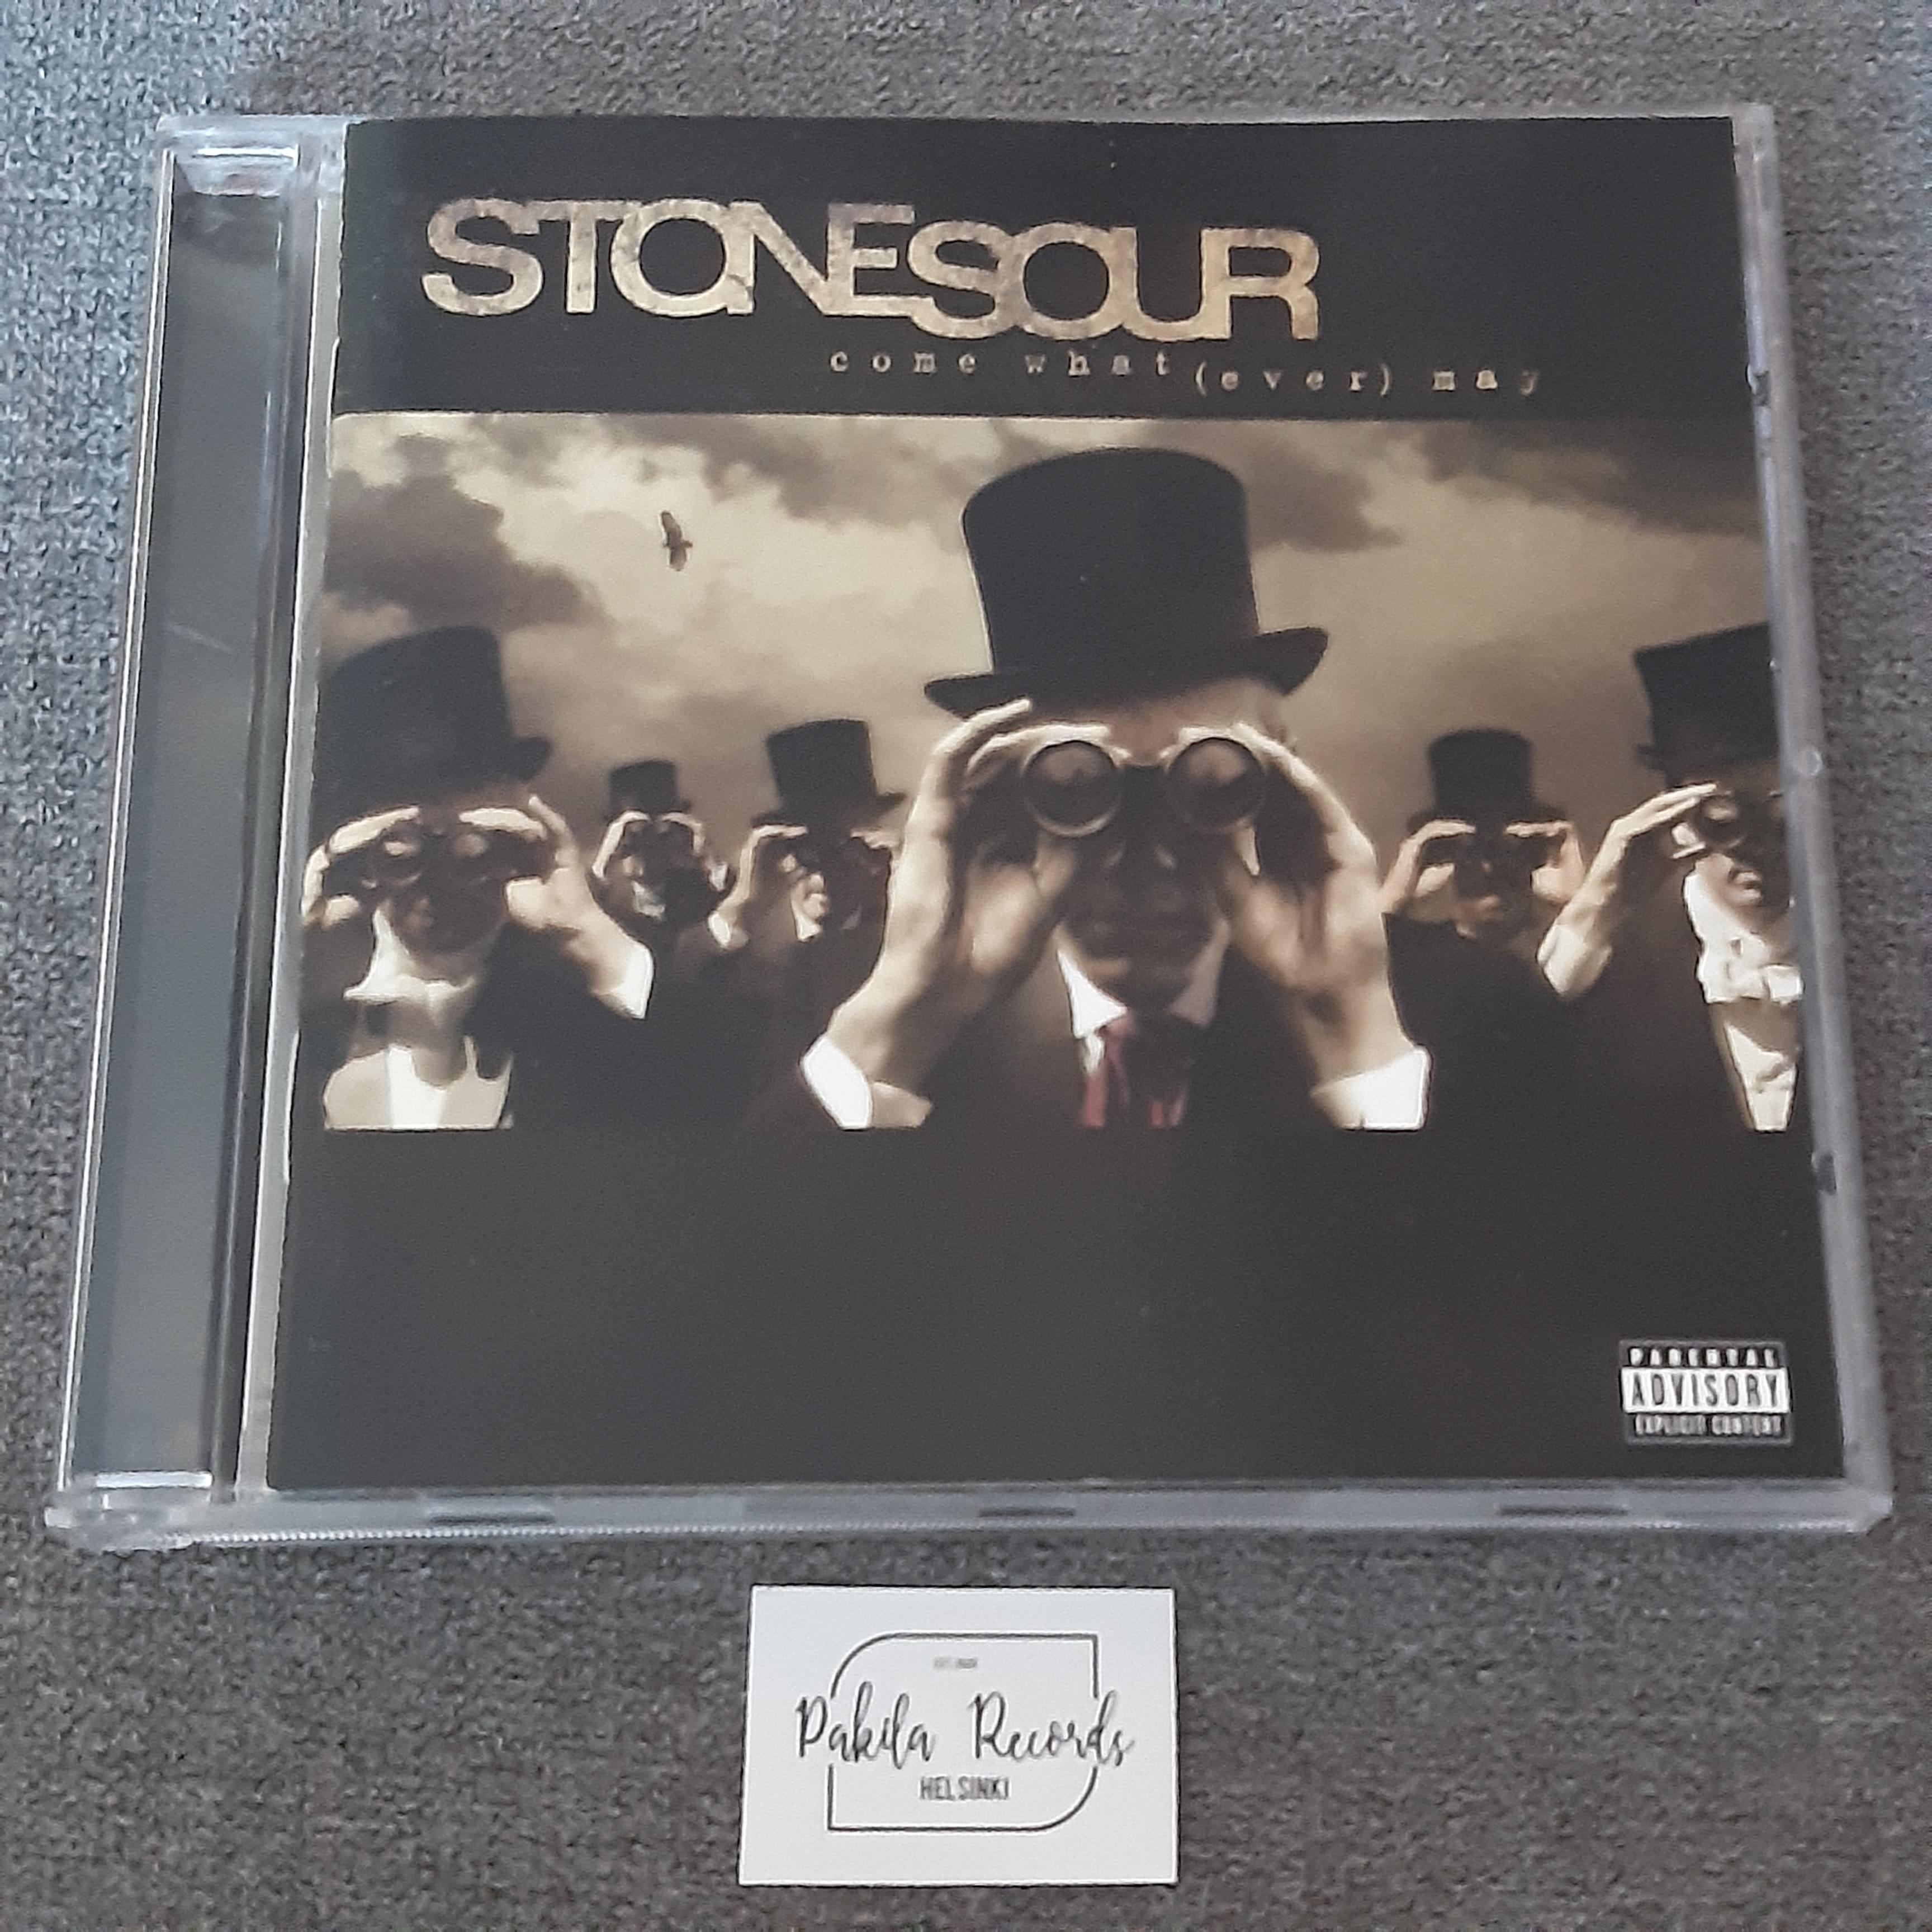 Stone Sour - Come What(ever) May - CD (käytetty)